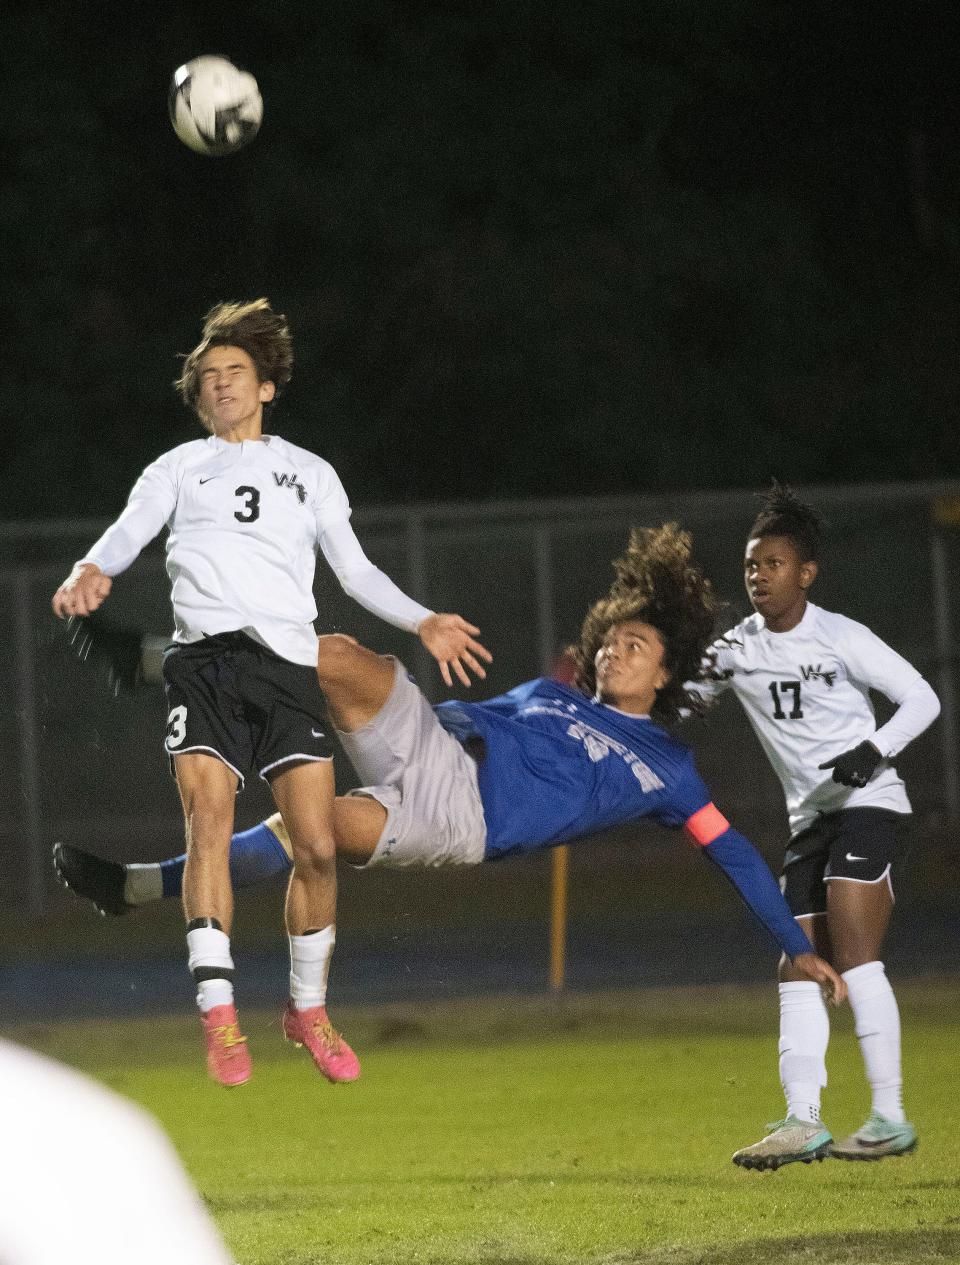 West Florida's Grey Griffin (No. 3) clears the ball out of the box as Washington's Kyle Hunnicutt (No. 10) tries for the bicycle kick during Tuesday's prep soccer matchup.